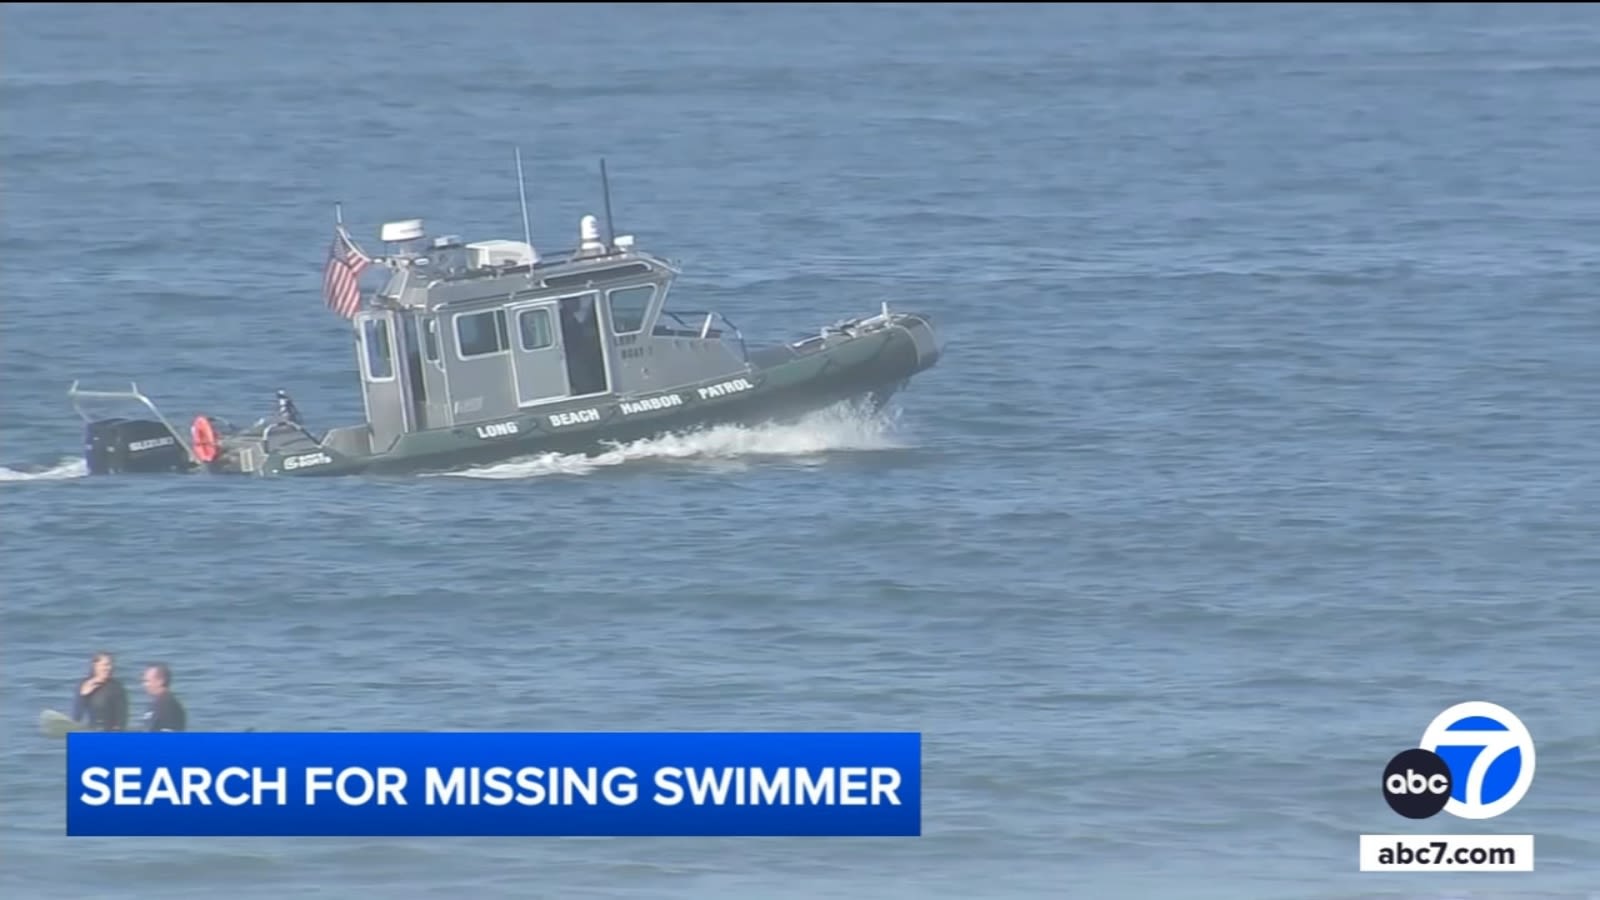 Coast Guard suspends search for missing teen swimmer off coast of Huntington Beach